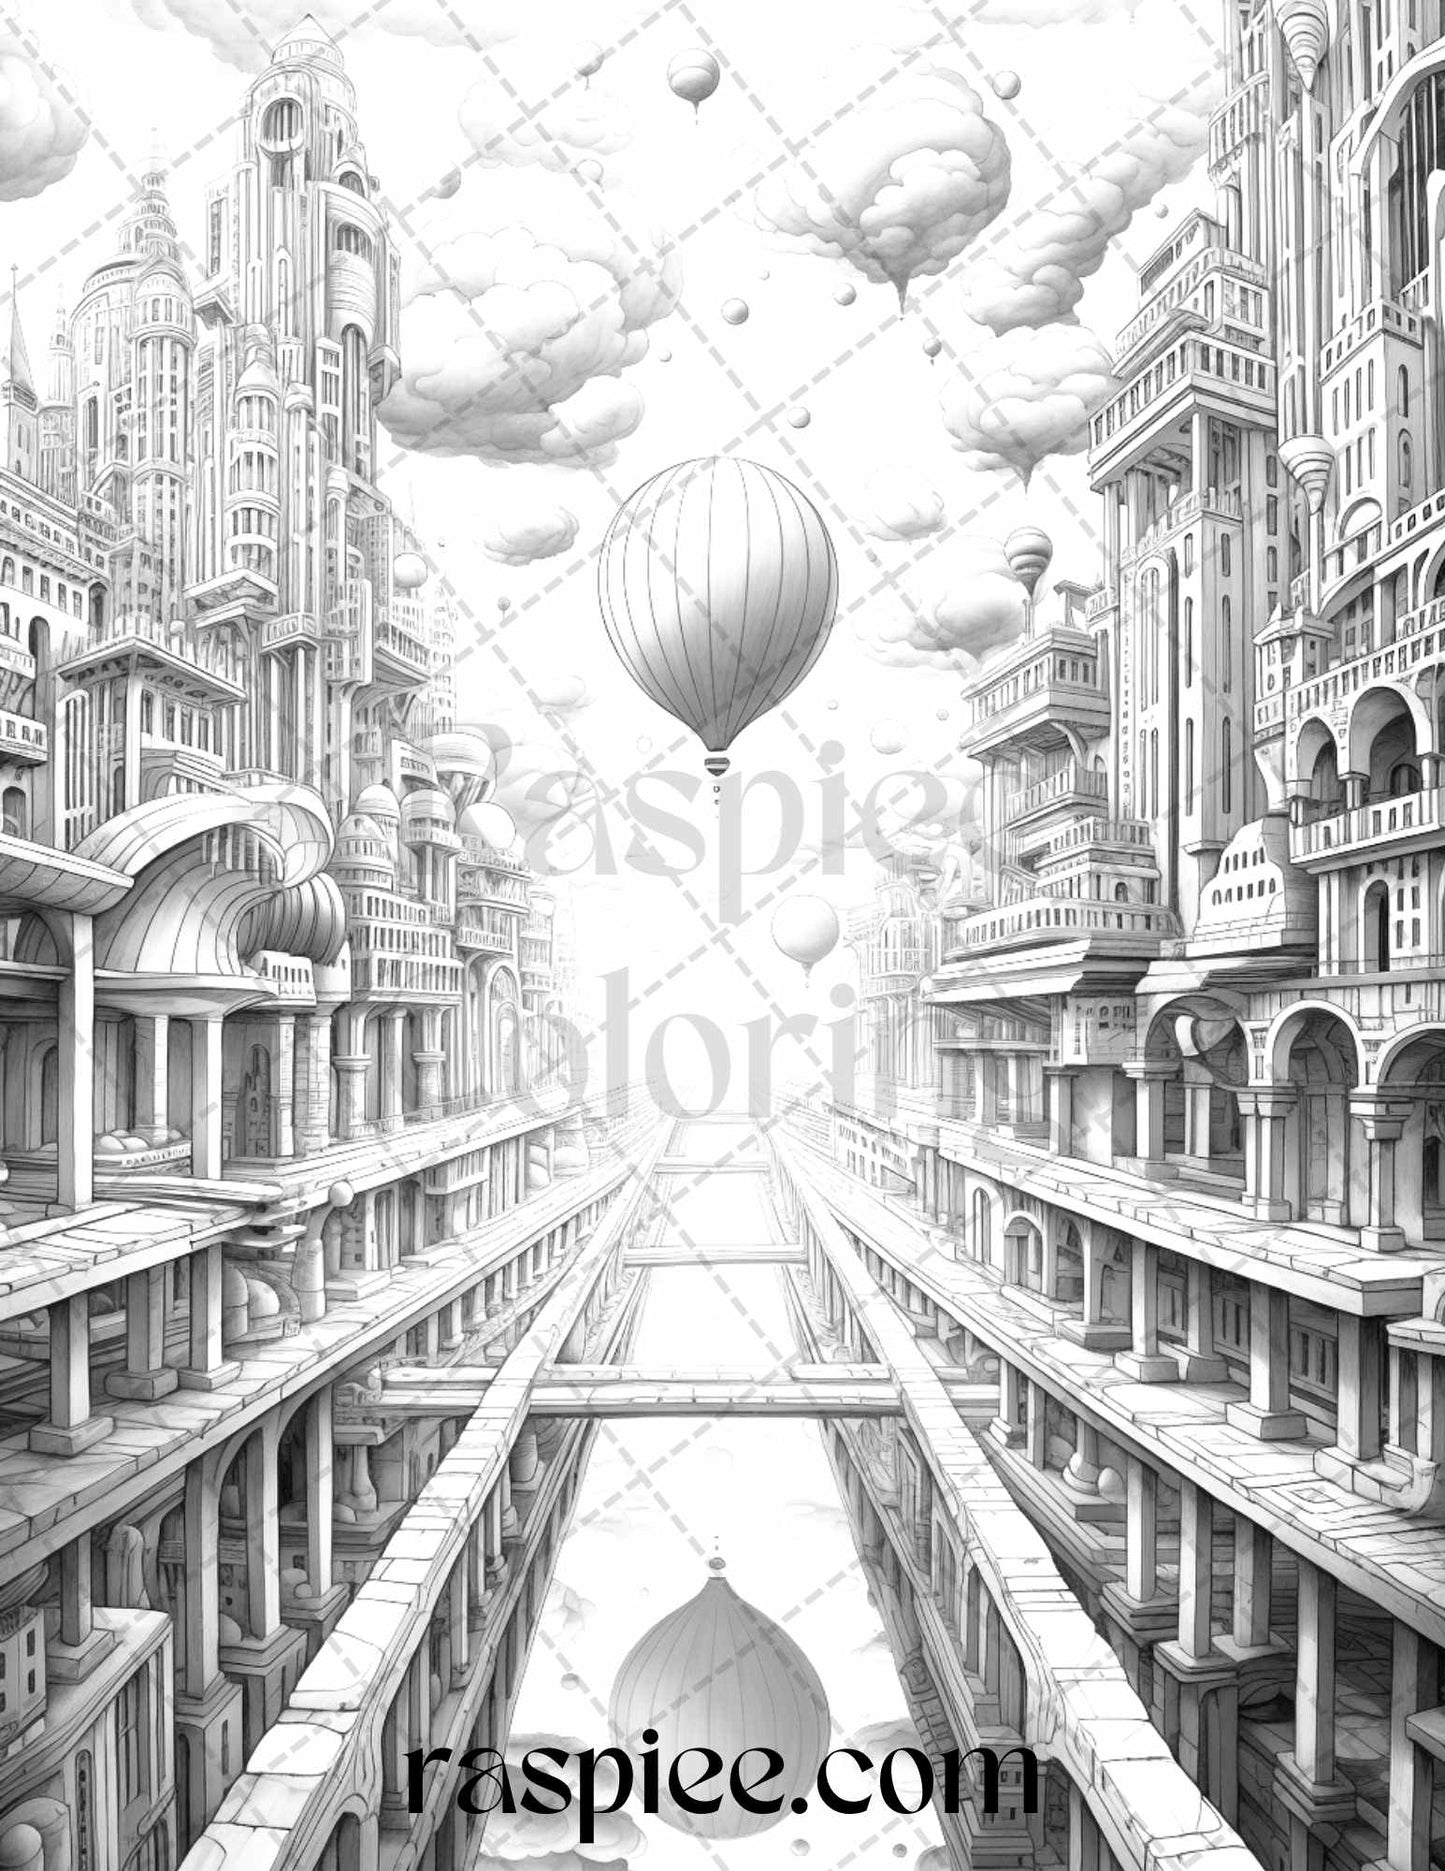 60 Enchanting Surrealism Grayscale Coloring Pages Printable for Adults, PDF File Instant Download - raspiee